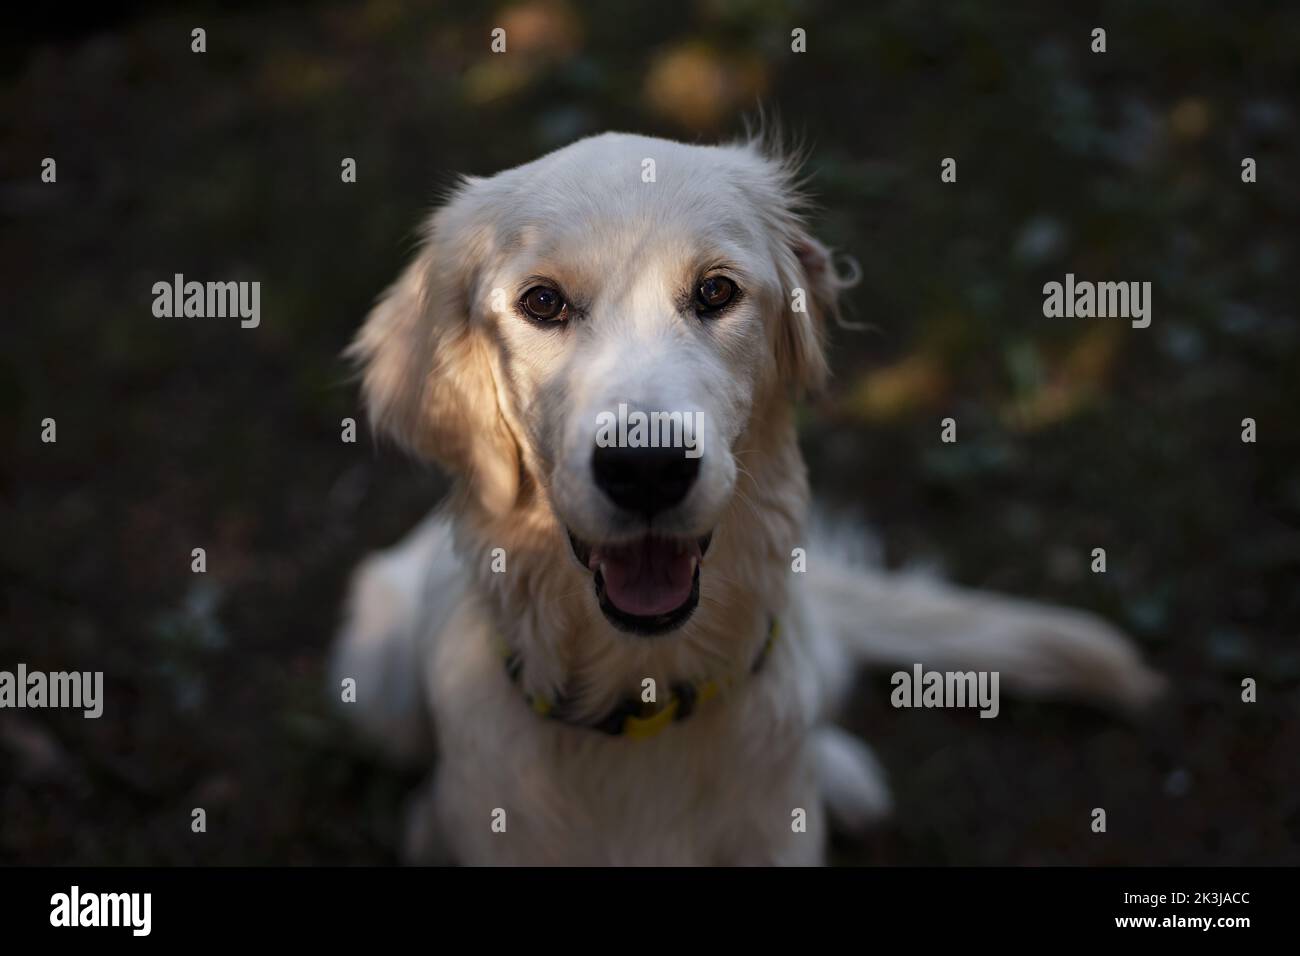 Golden Retriever portrait. Young cream colored dog looking interested in the camera. Stock Photo